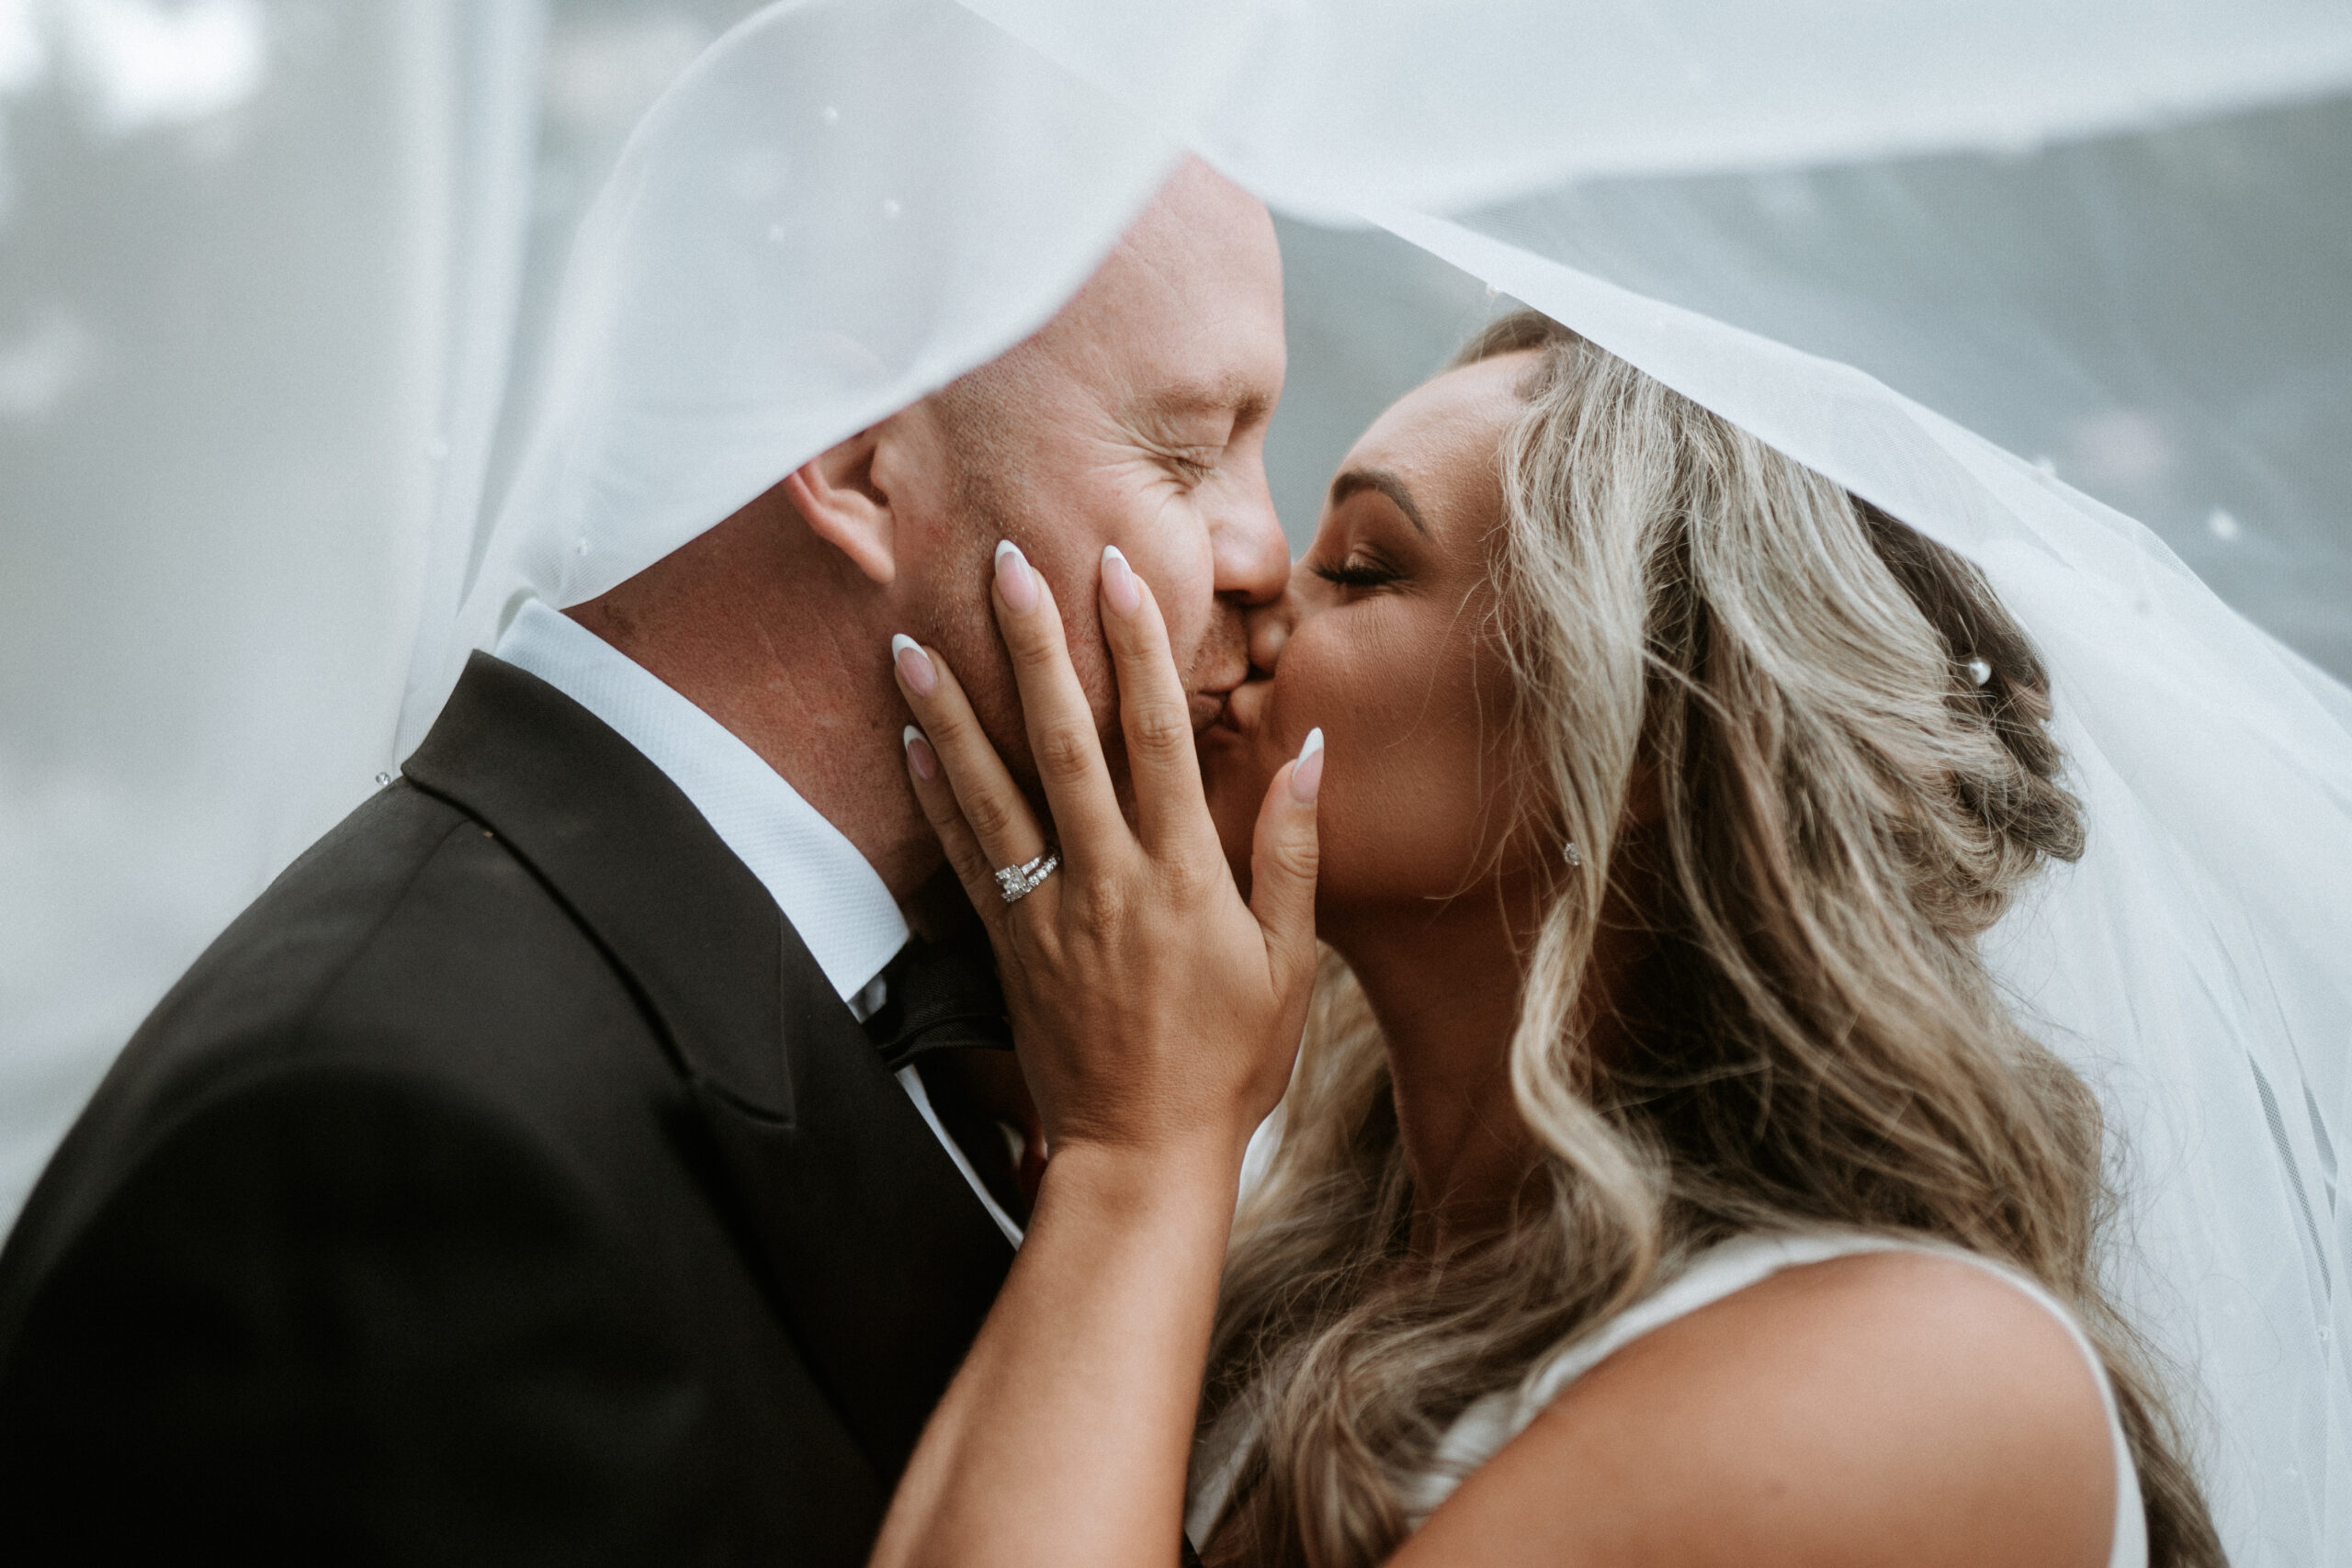 Stealing an intimate moment under the veil to seal their commitment to each other with a kiss.